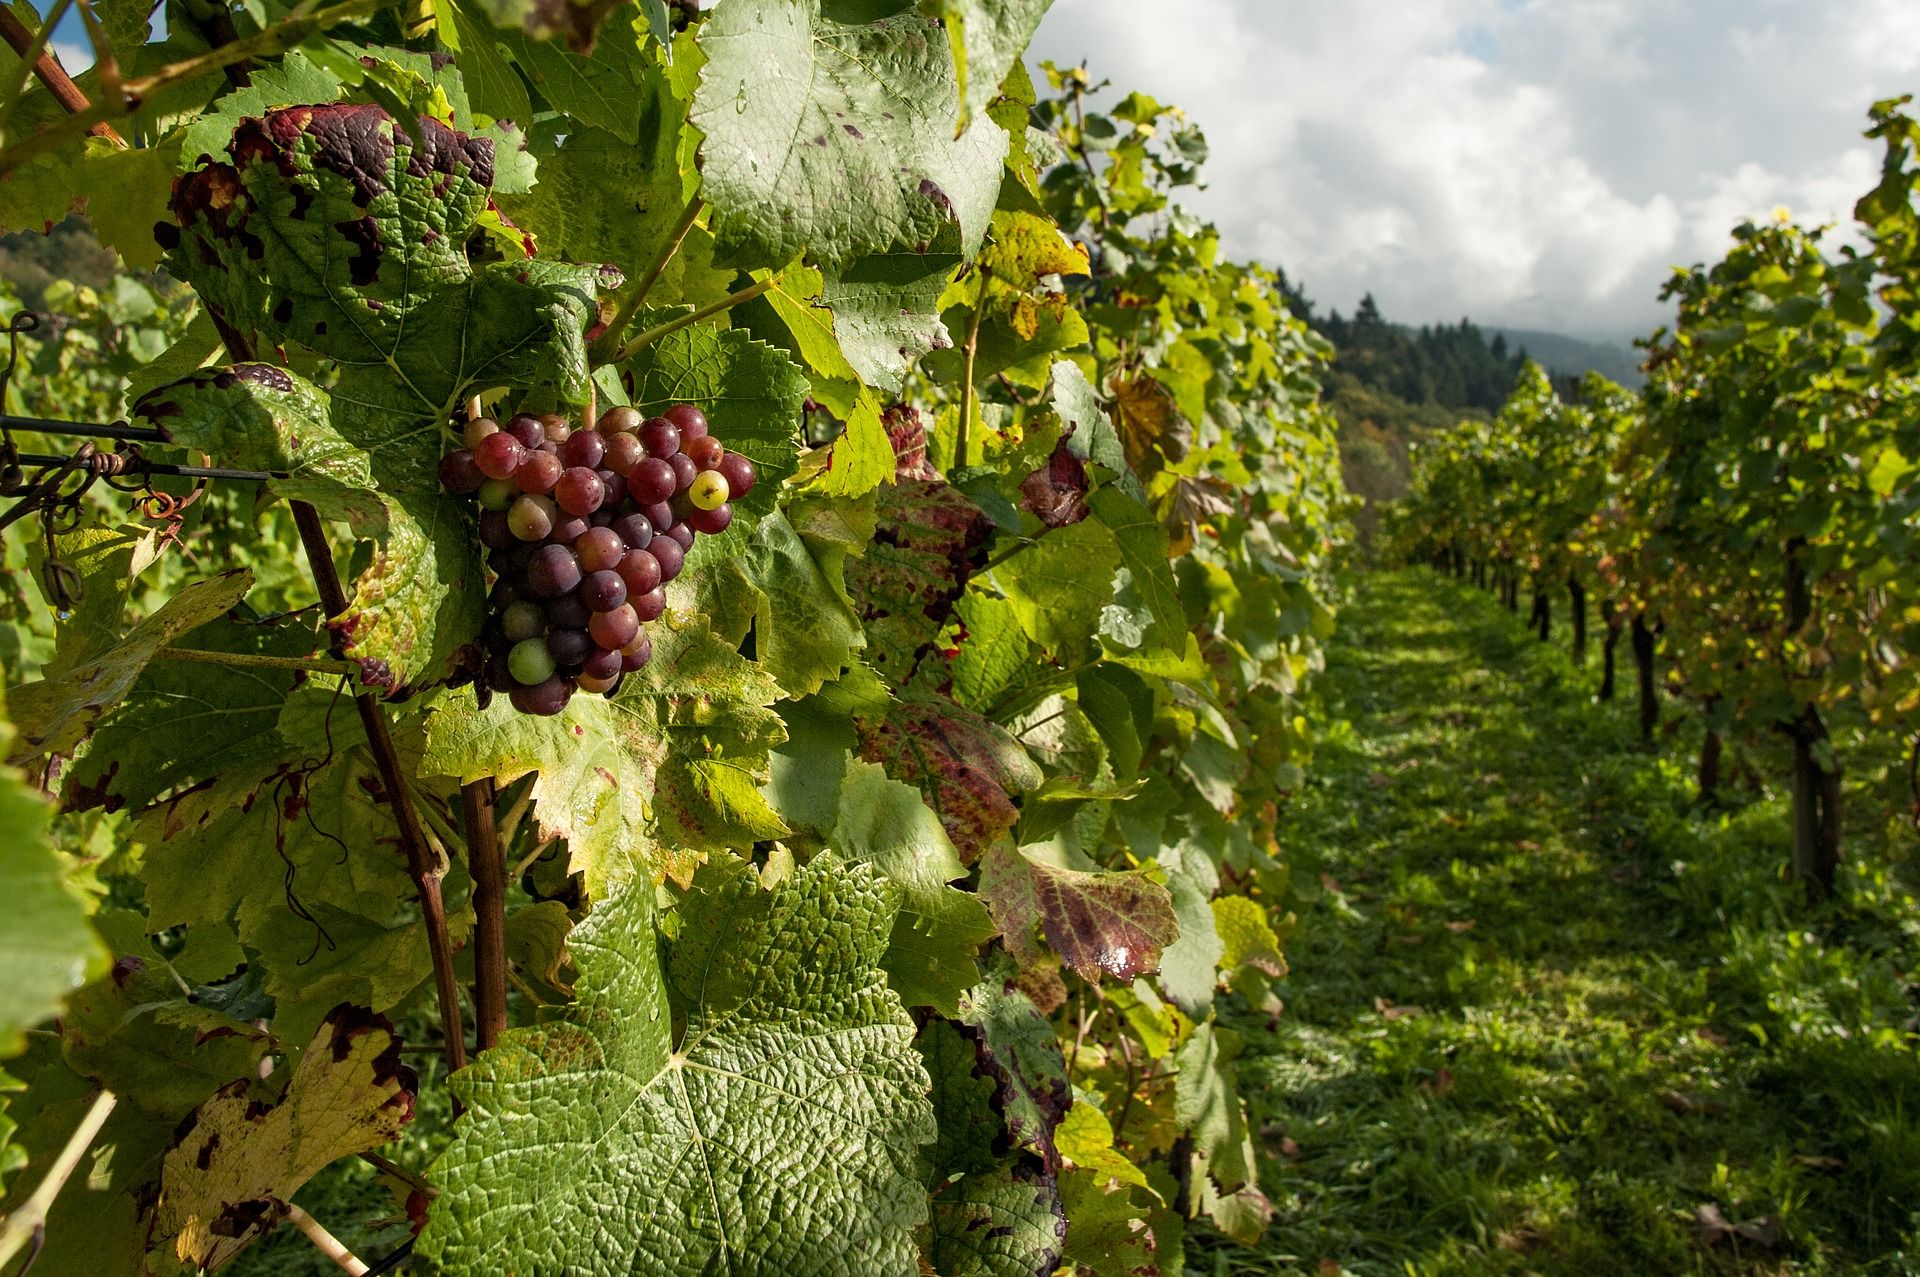 Vineyard with red grapes